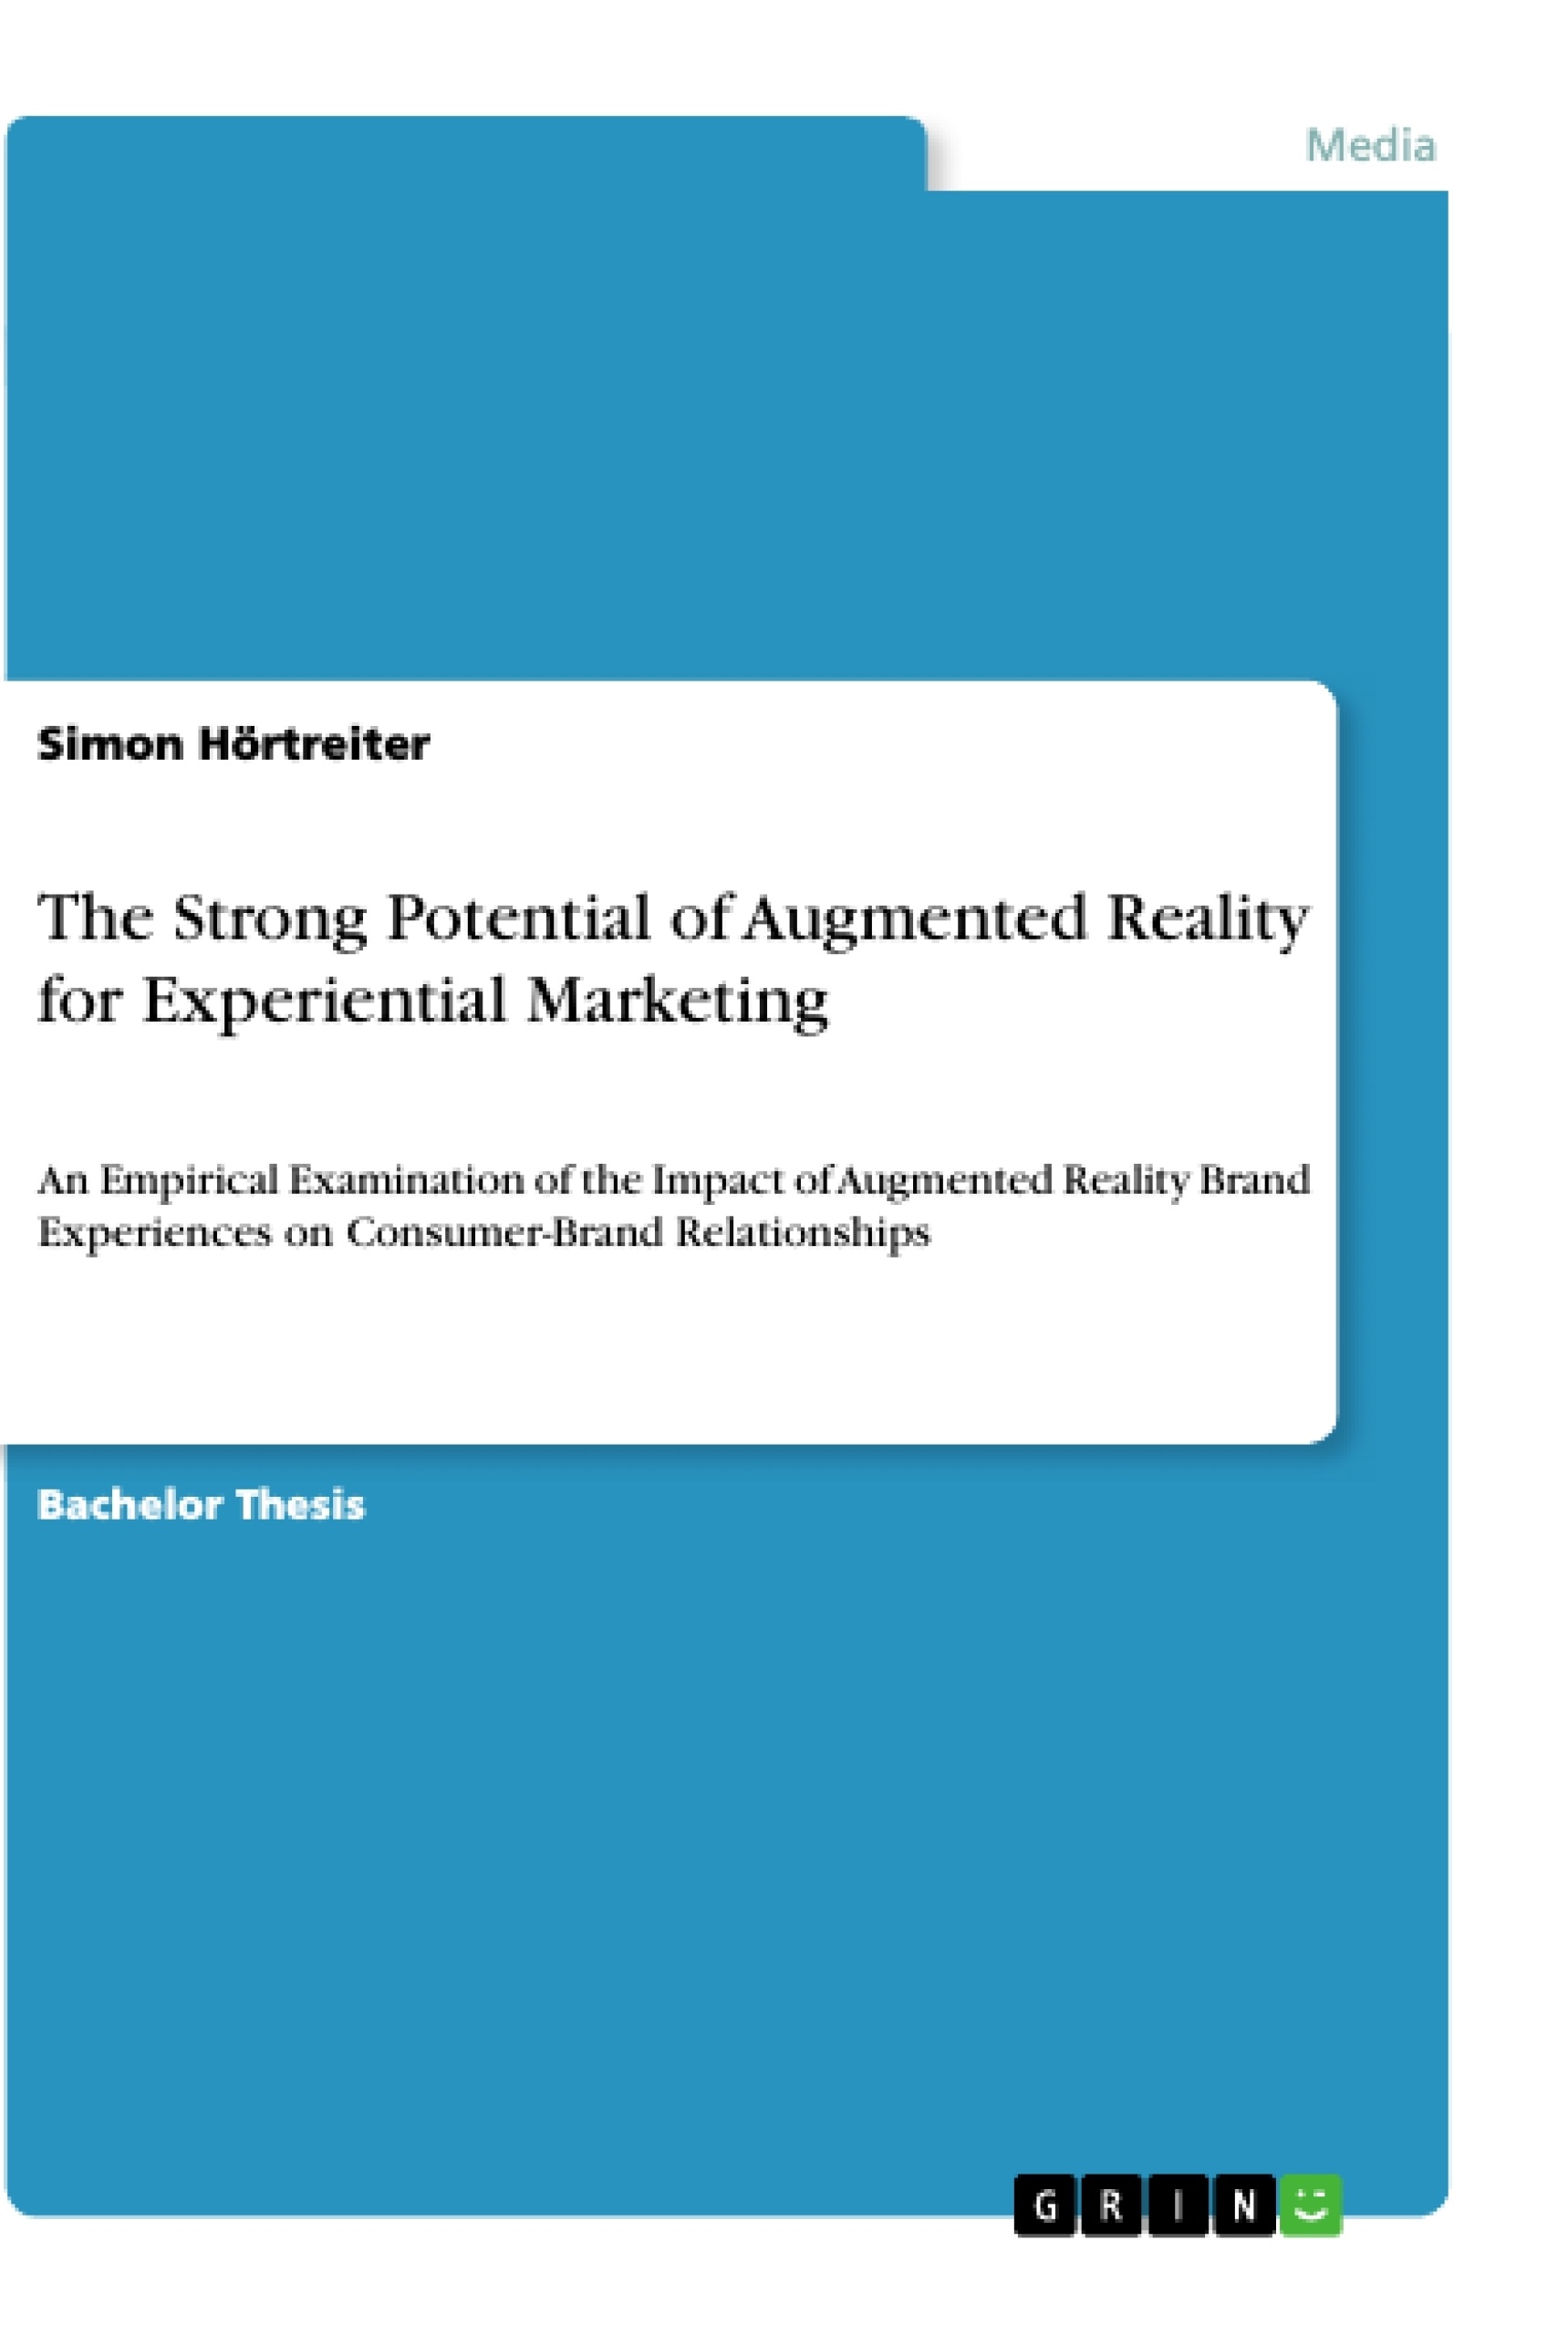 Title: The Strong Potential of Augmented Reality for Experiential Marketing